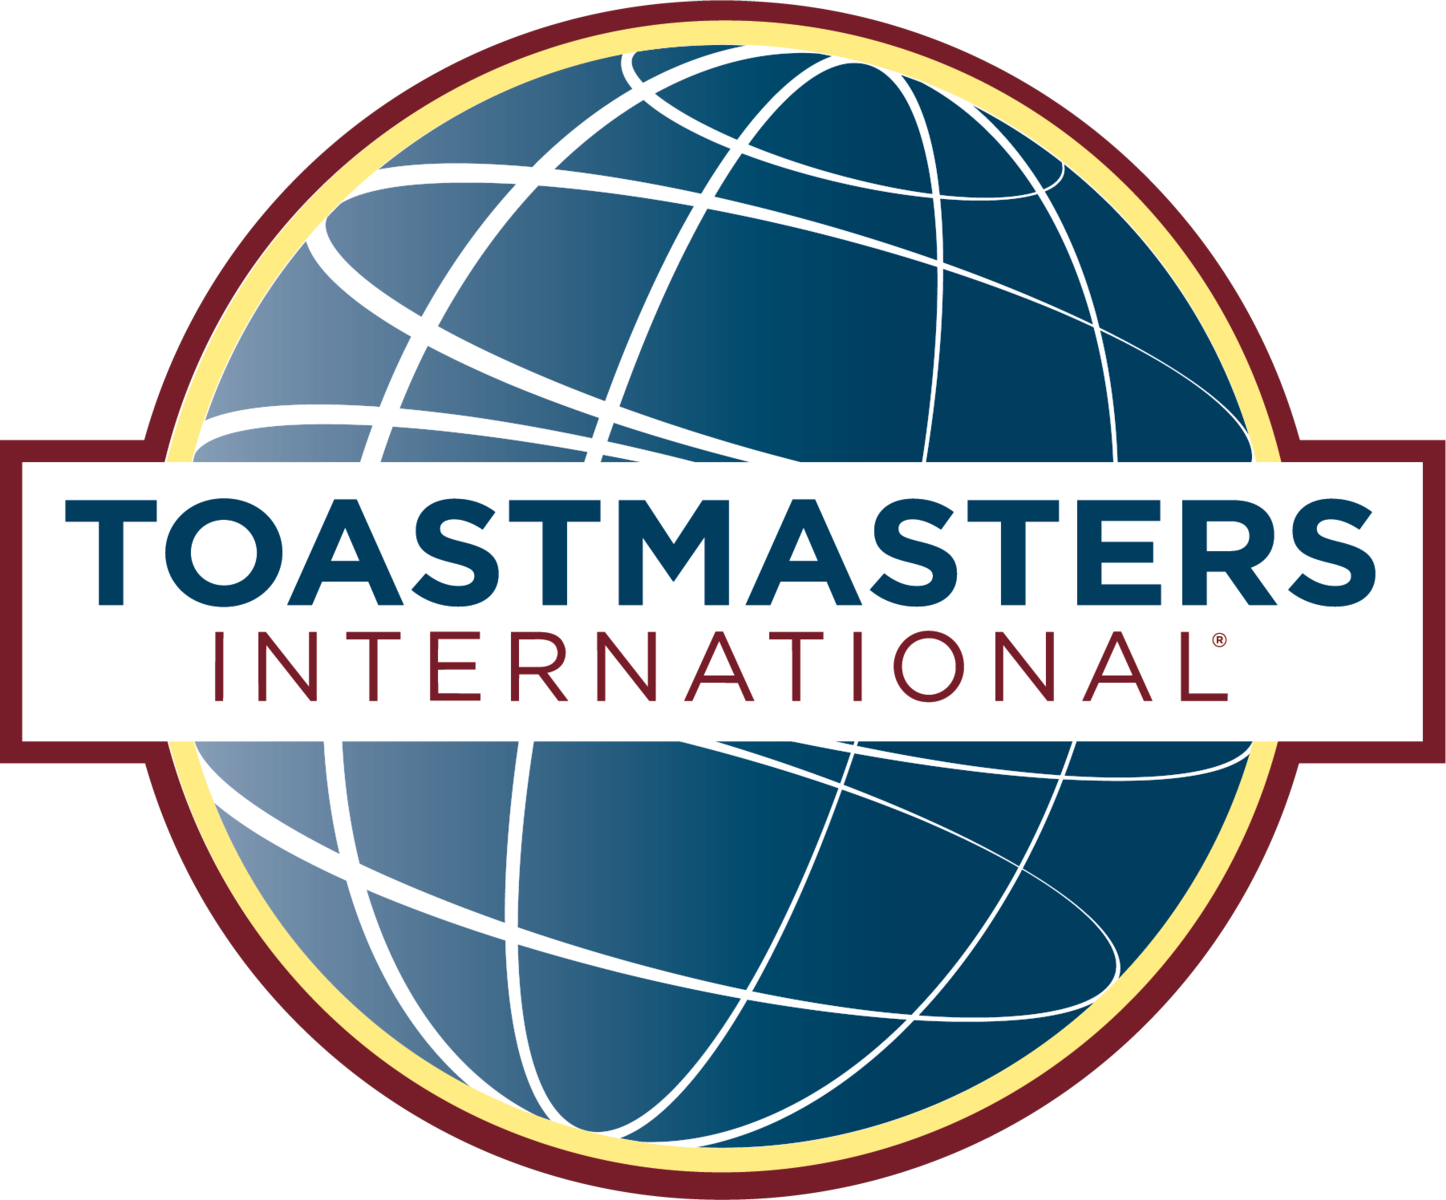 /online/TheHummData/listing media/Pics%20not%20tied%20to%20dates/toastmasters-logo-color.png